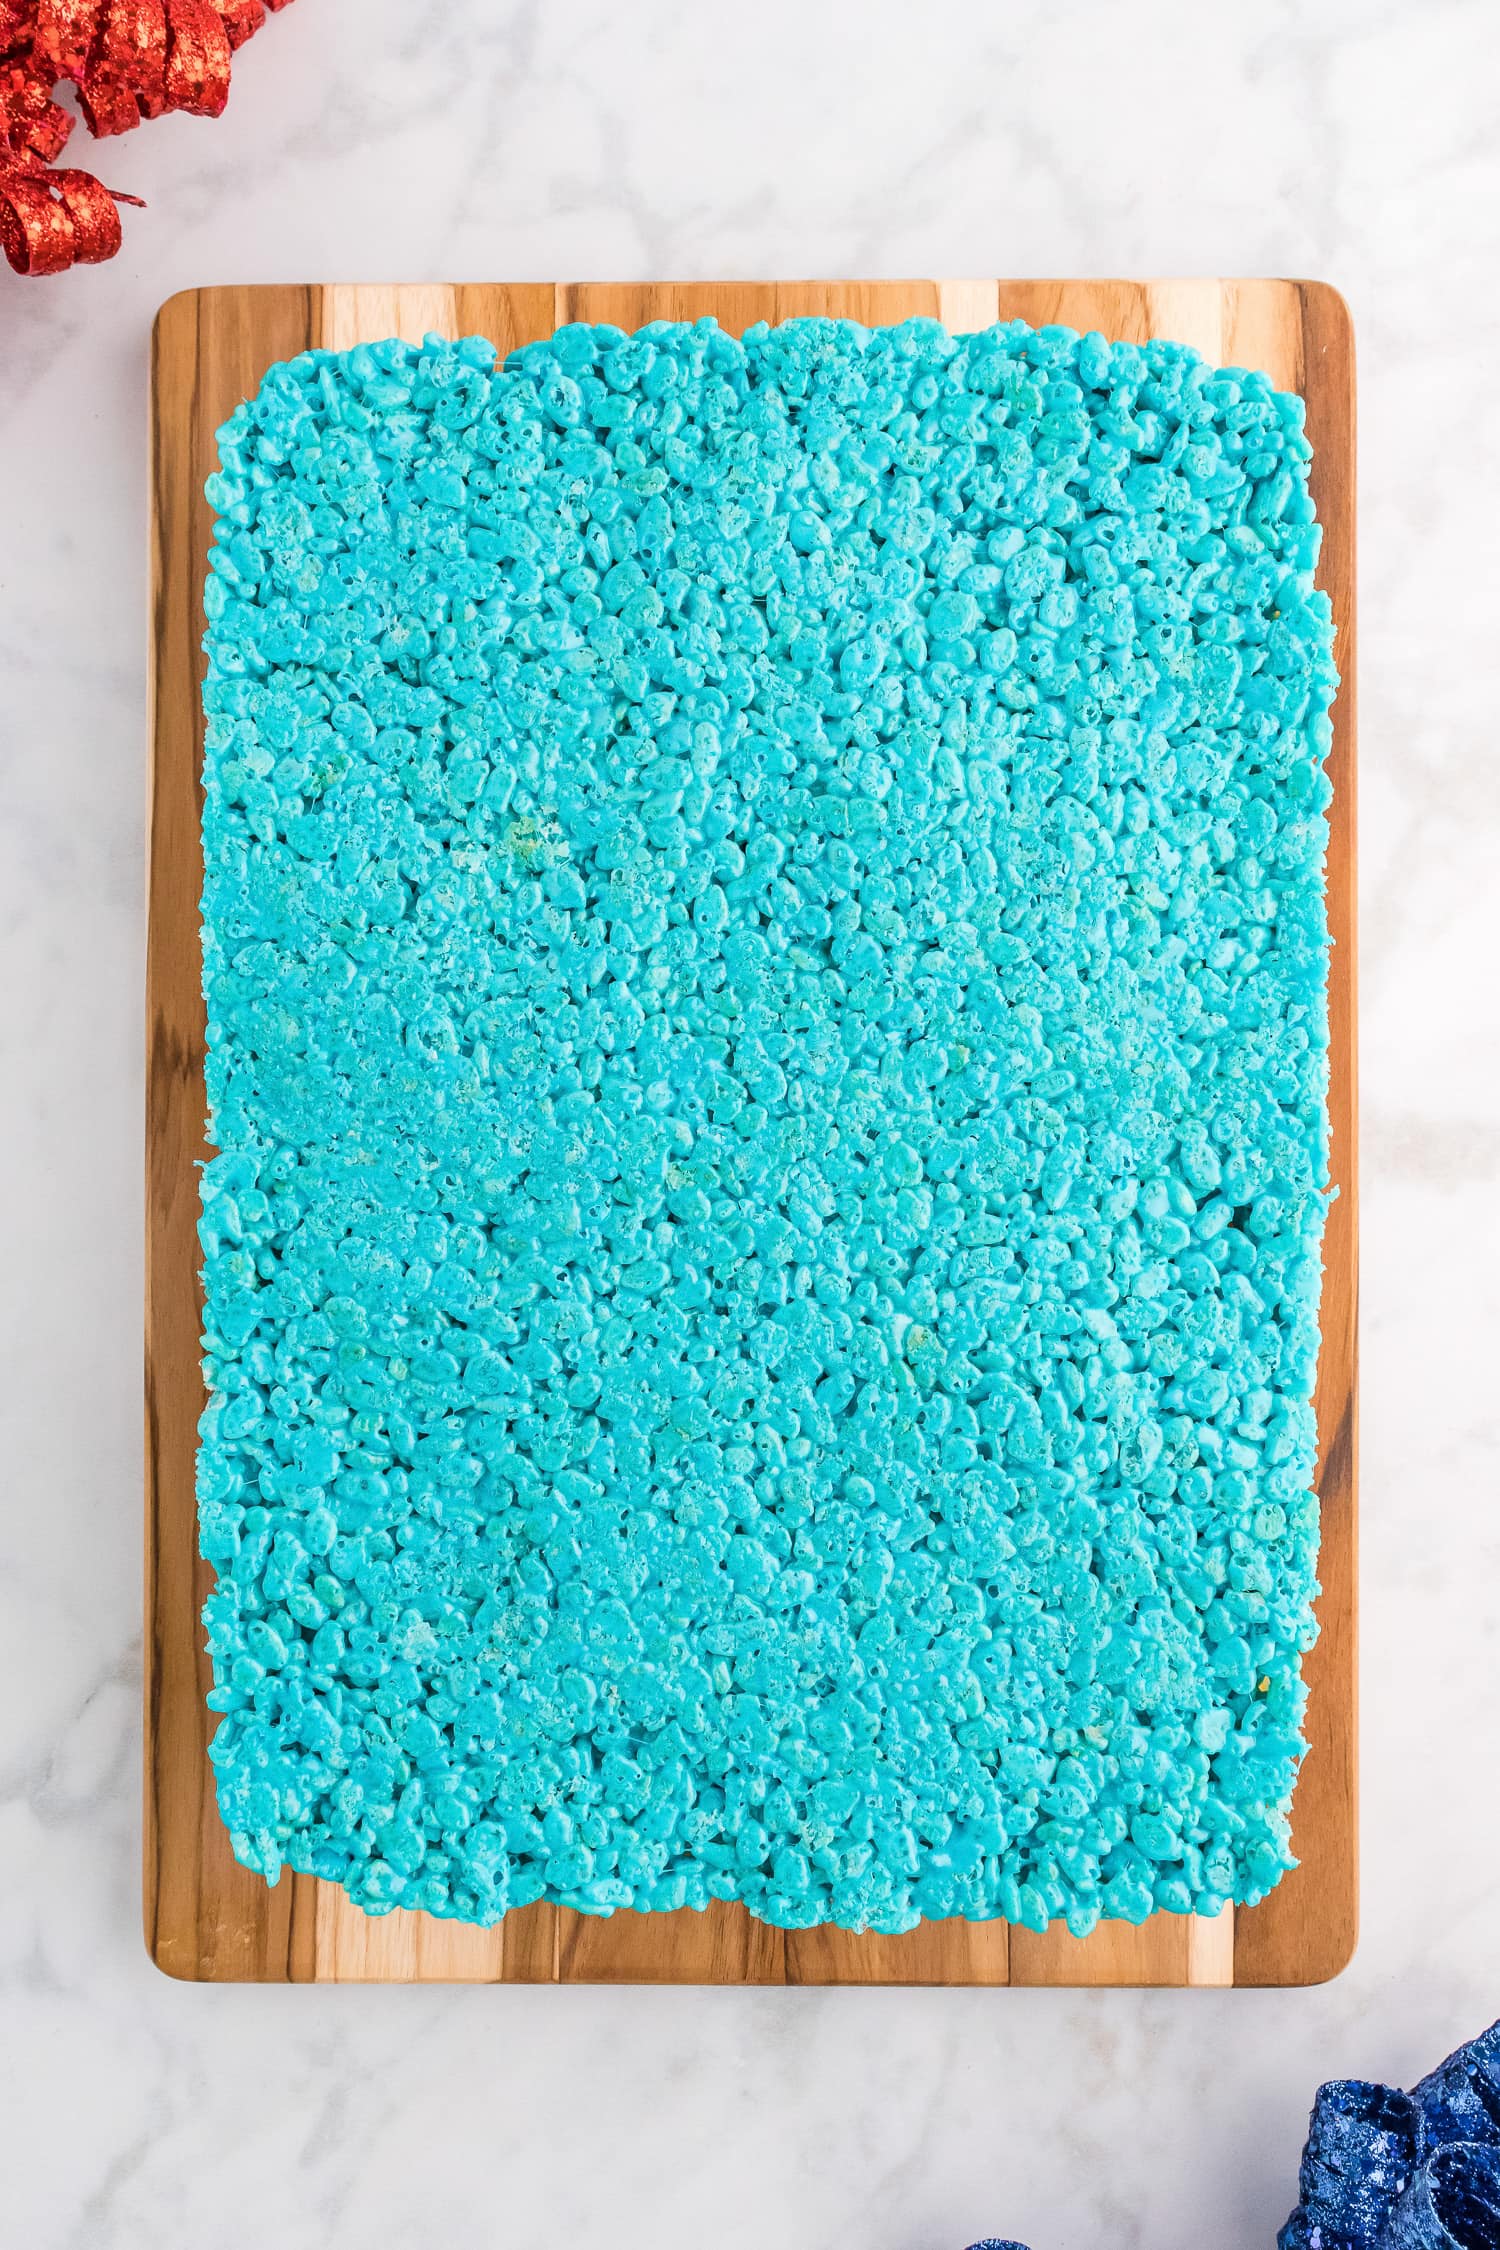 Red White and Blue Rice Krispie Treats on cutting board